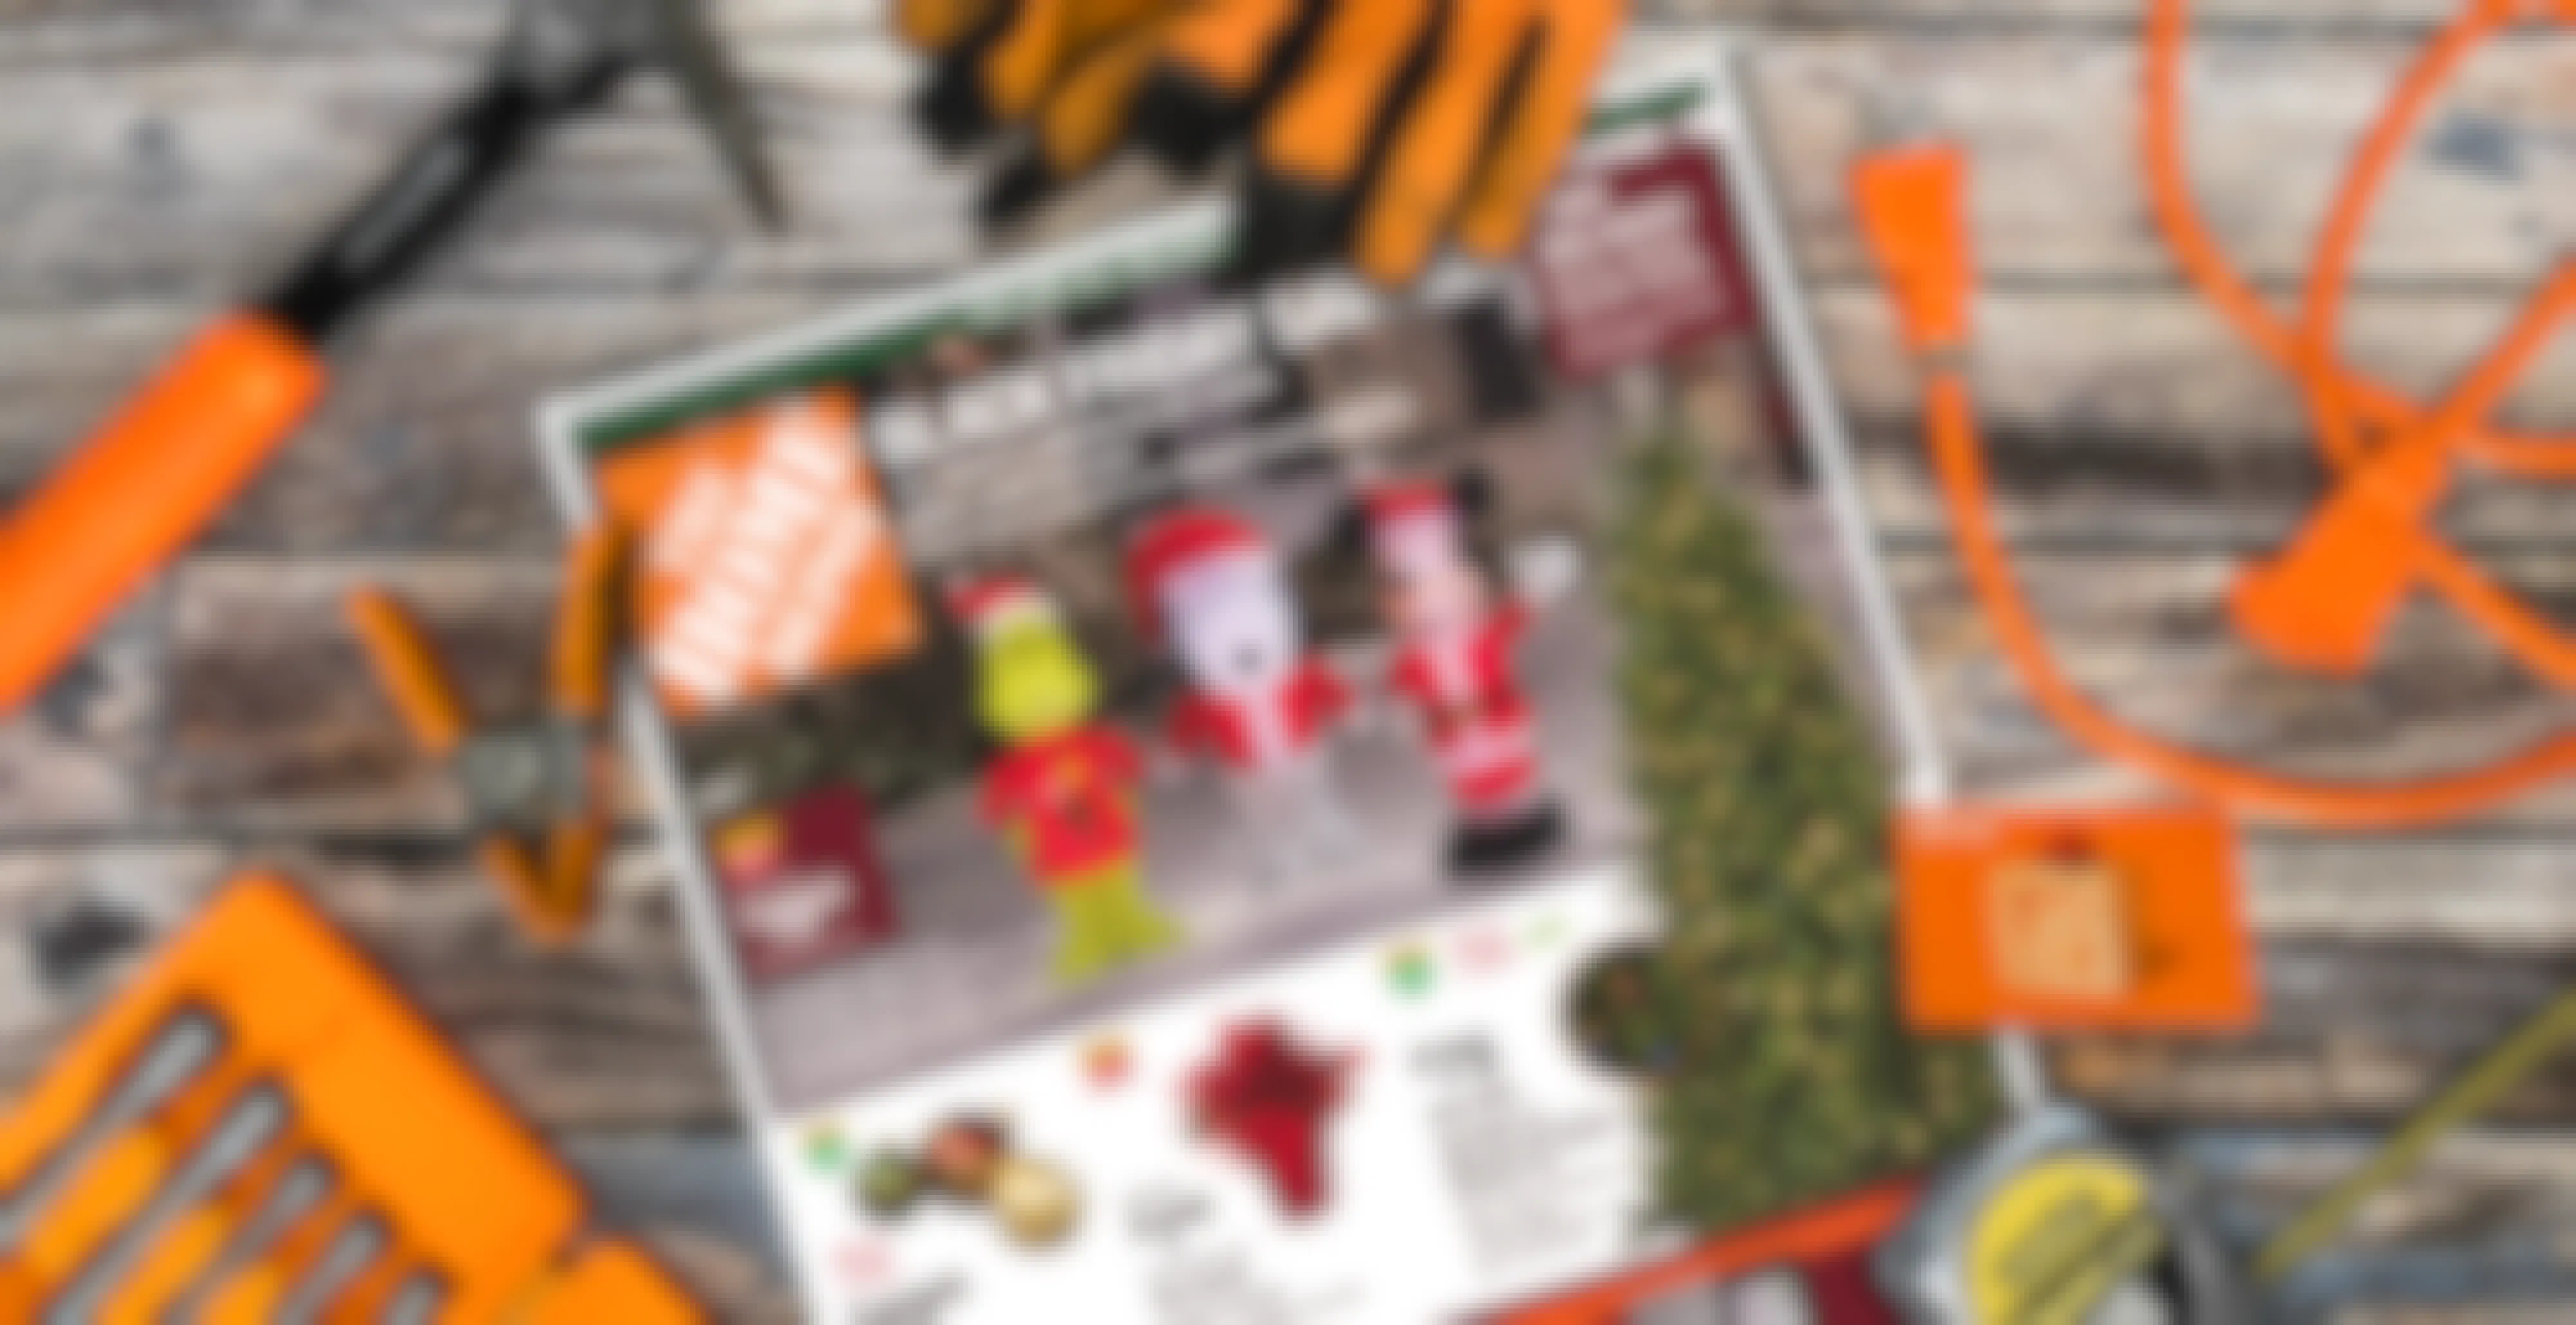 Best Home Depot Black Friday Deals to Look for in 2023